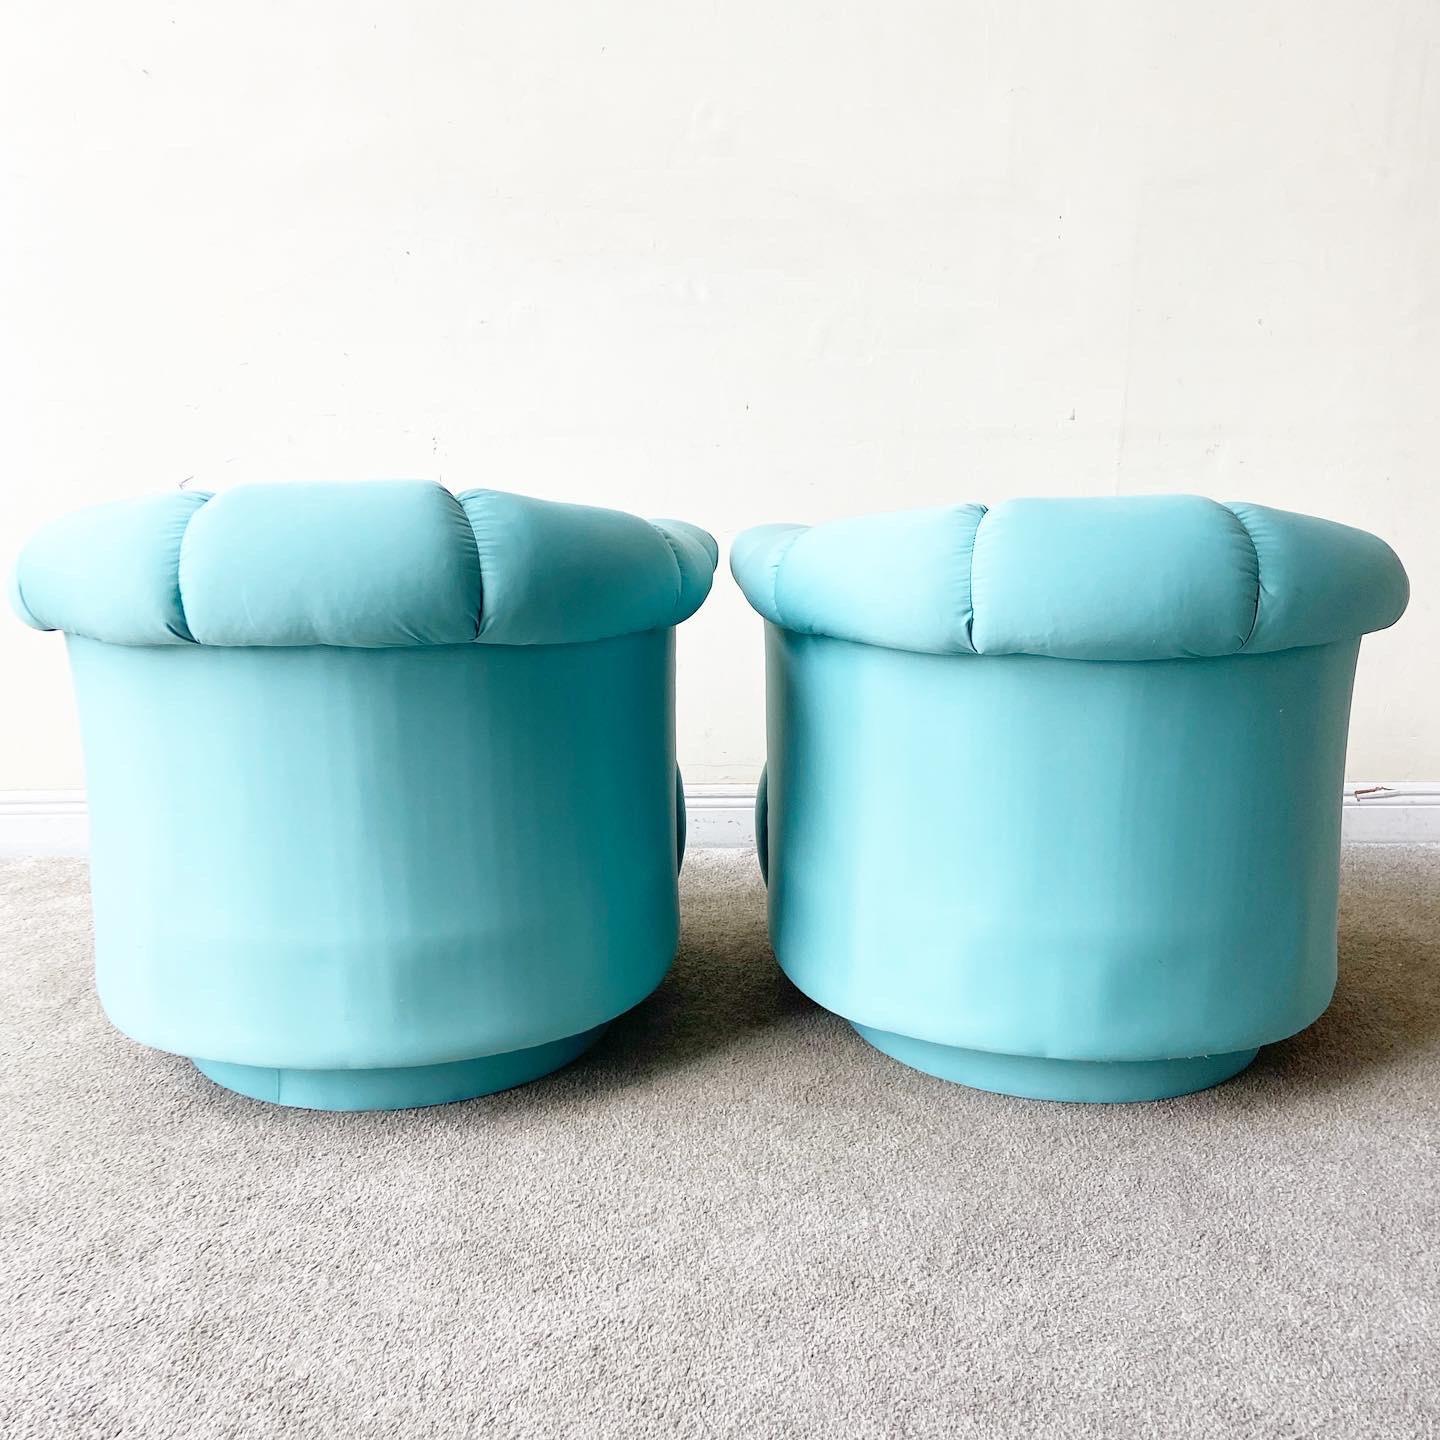 American Postmodern Turquoise Clam Shell Swivel Chairs, a Pair